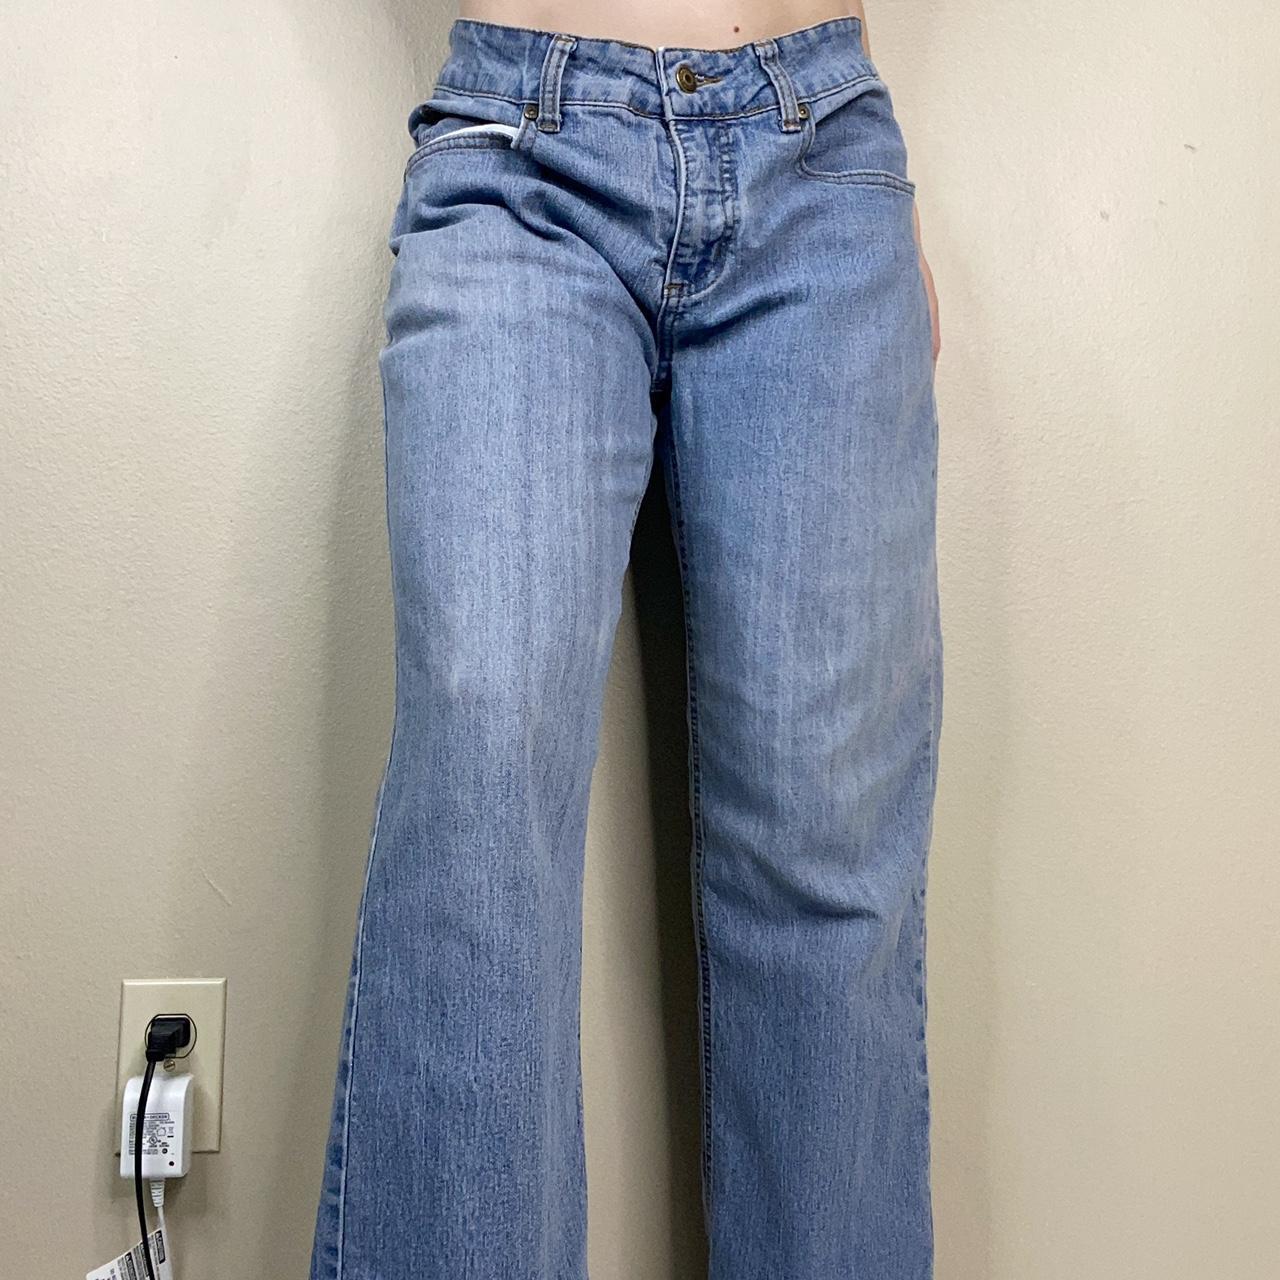 Product Image 2 - Southern Expression LOLA mom jeans
Size